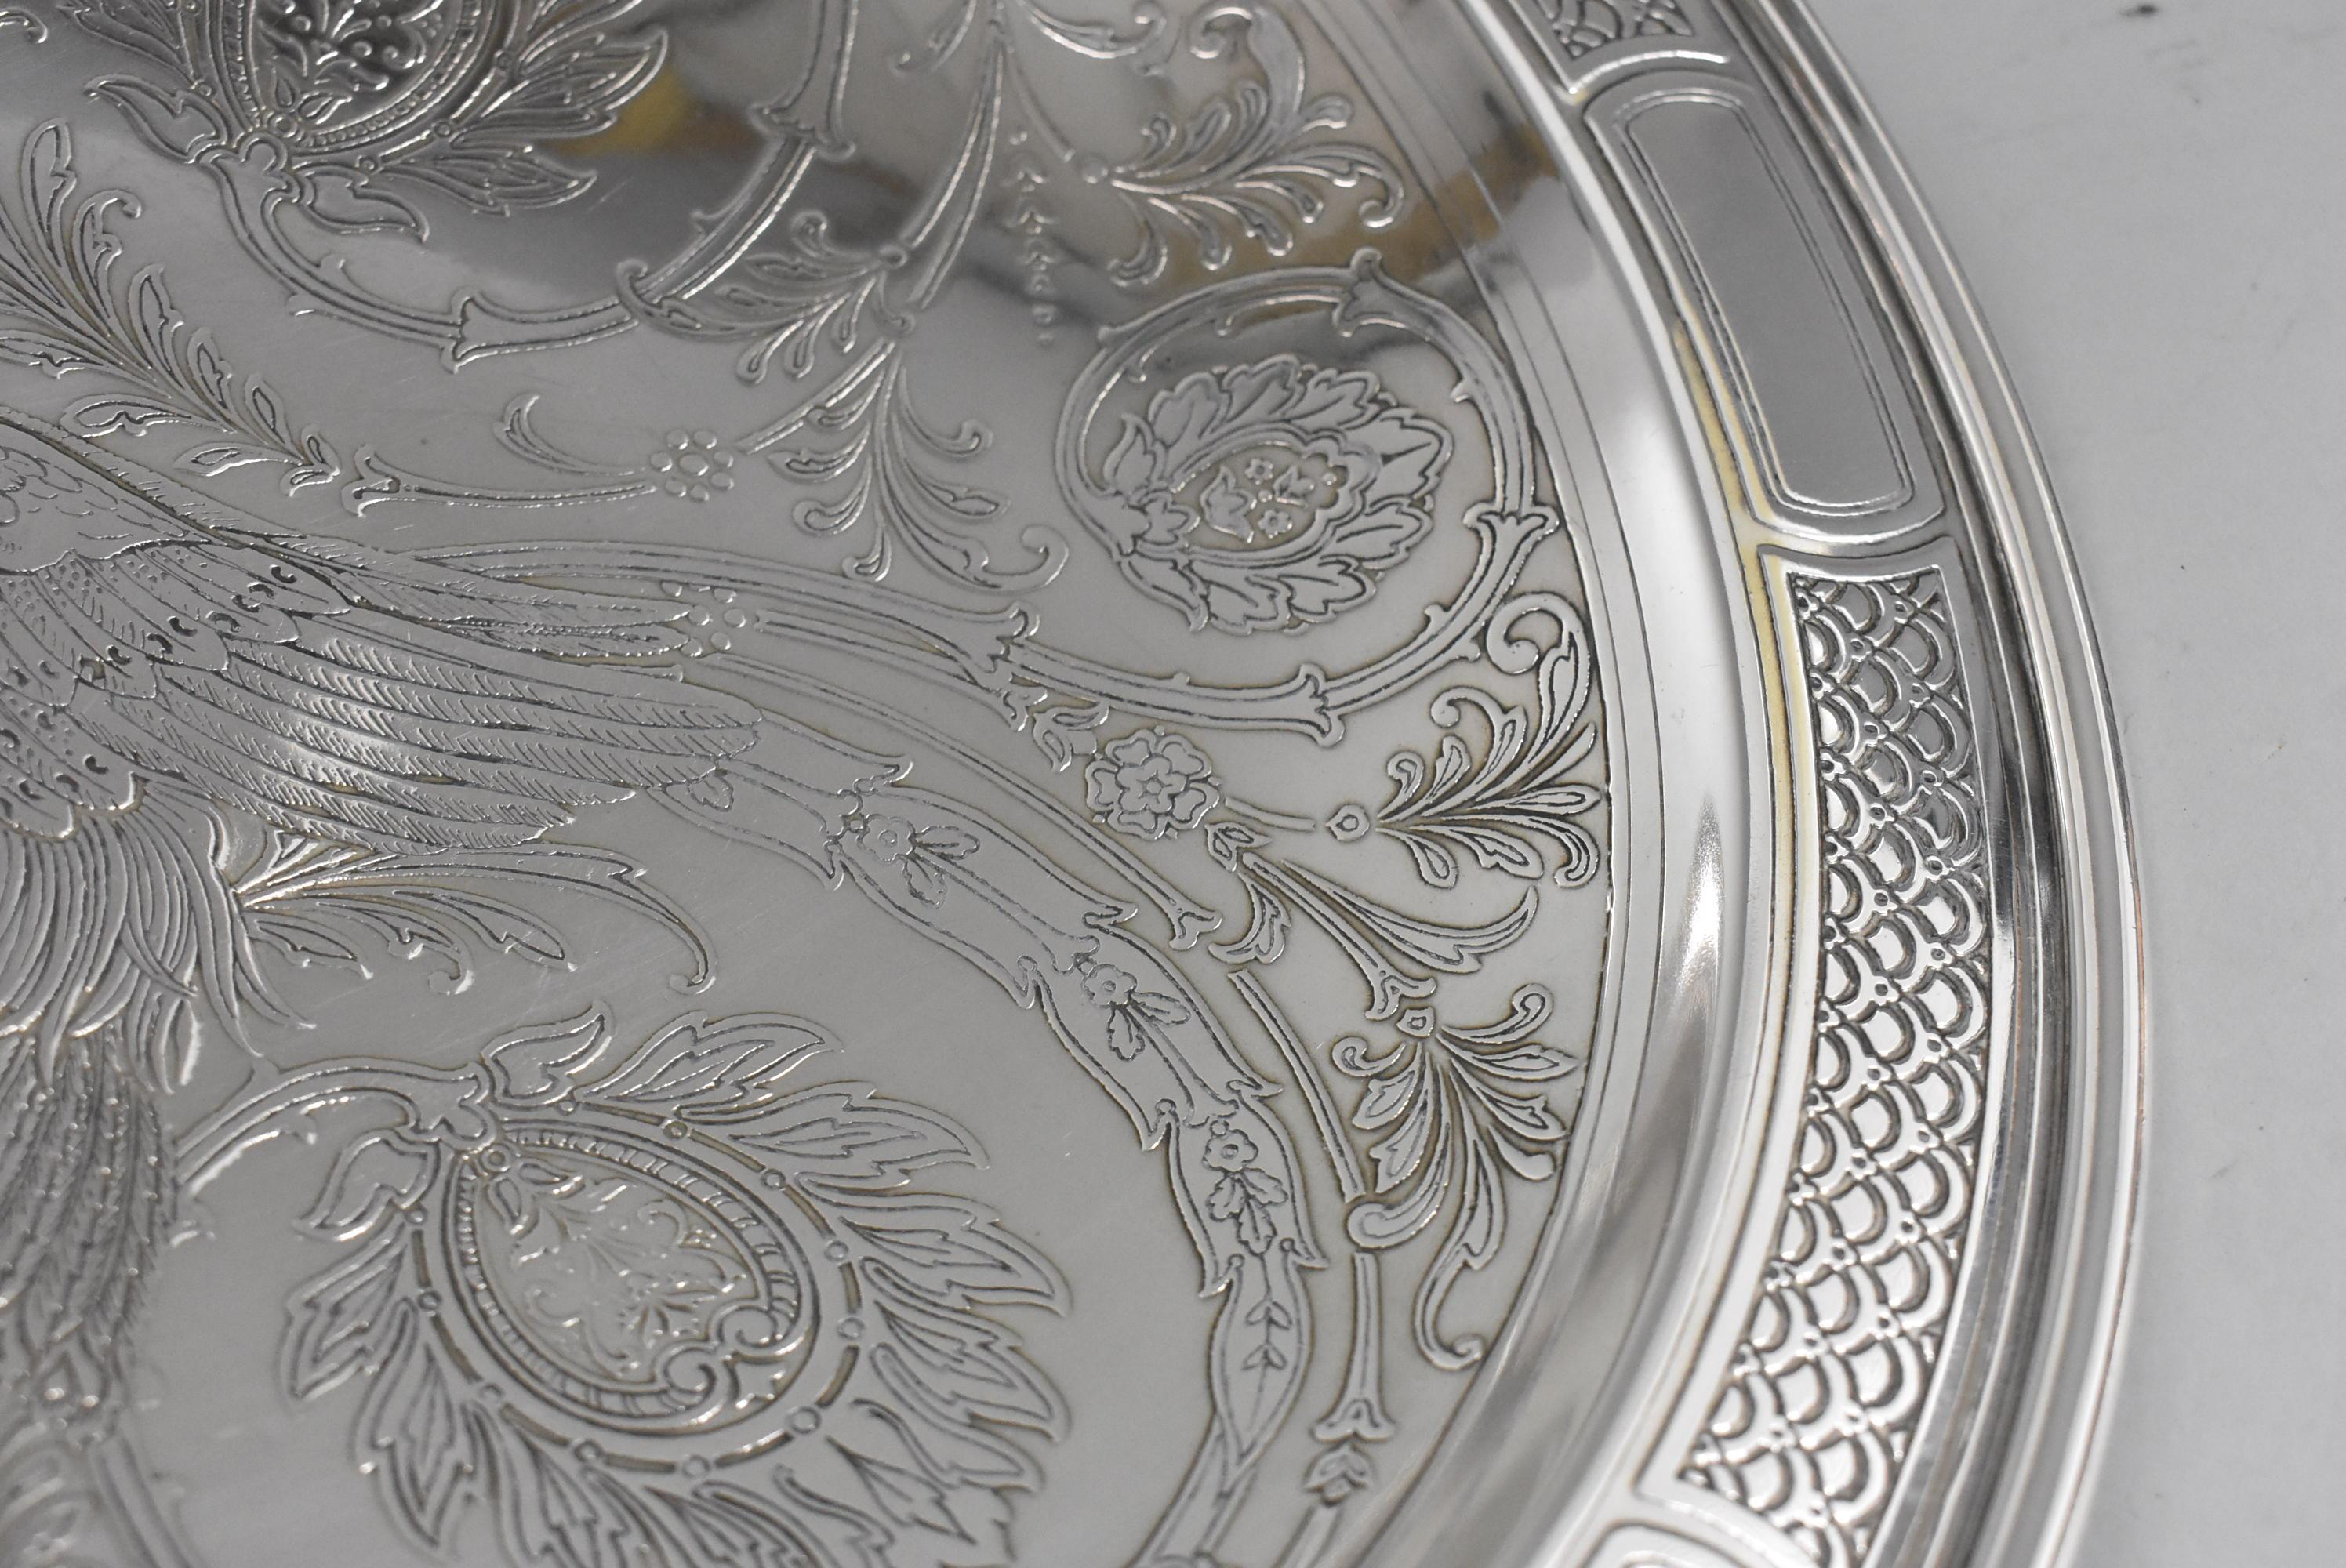 North American Aesthetic Tiffany & Co. Sterling Silver Bowl Bird Flowers 925-1000 18696A Makers